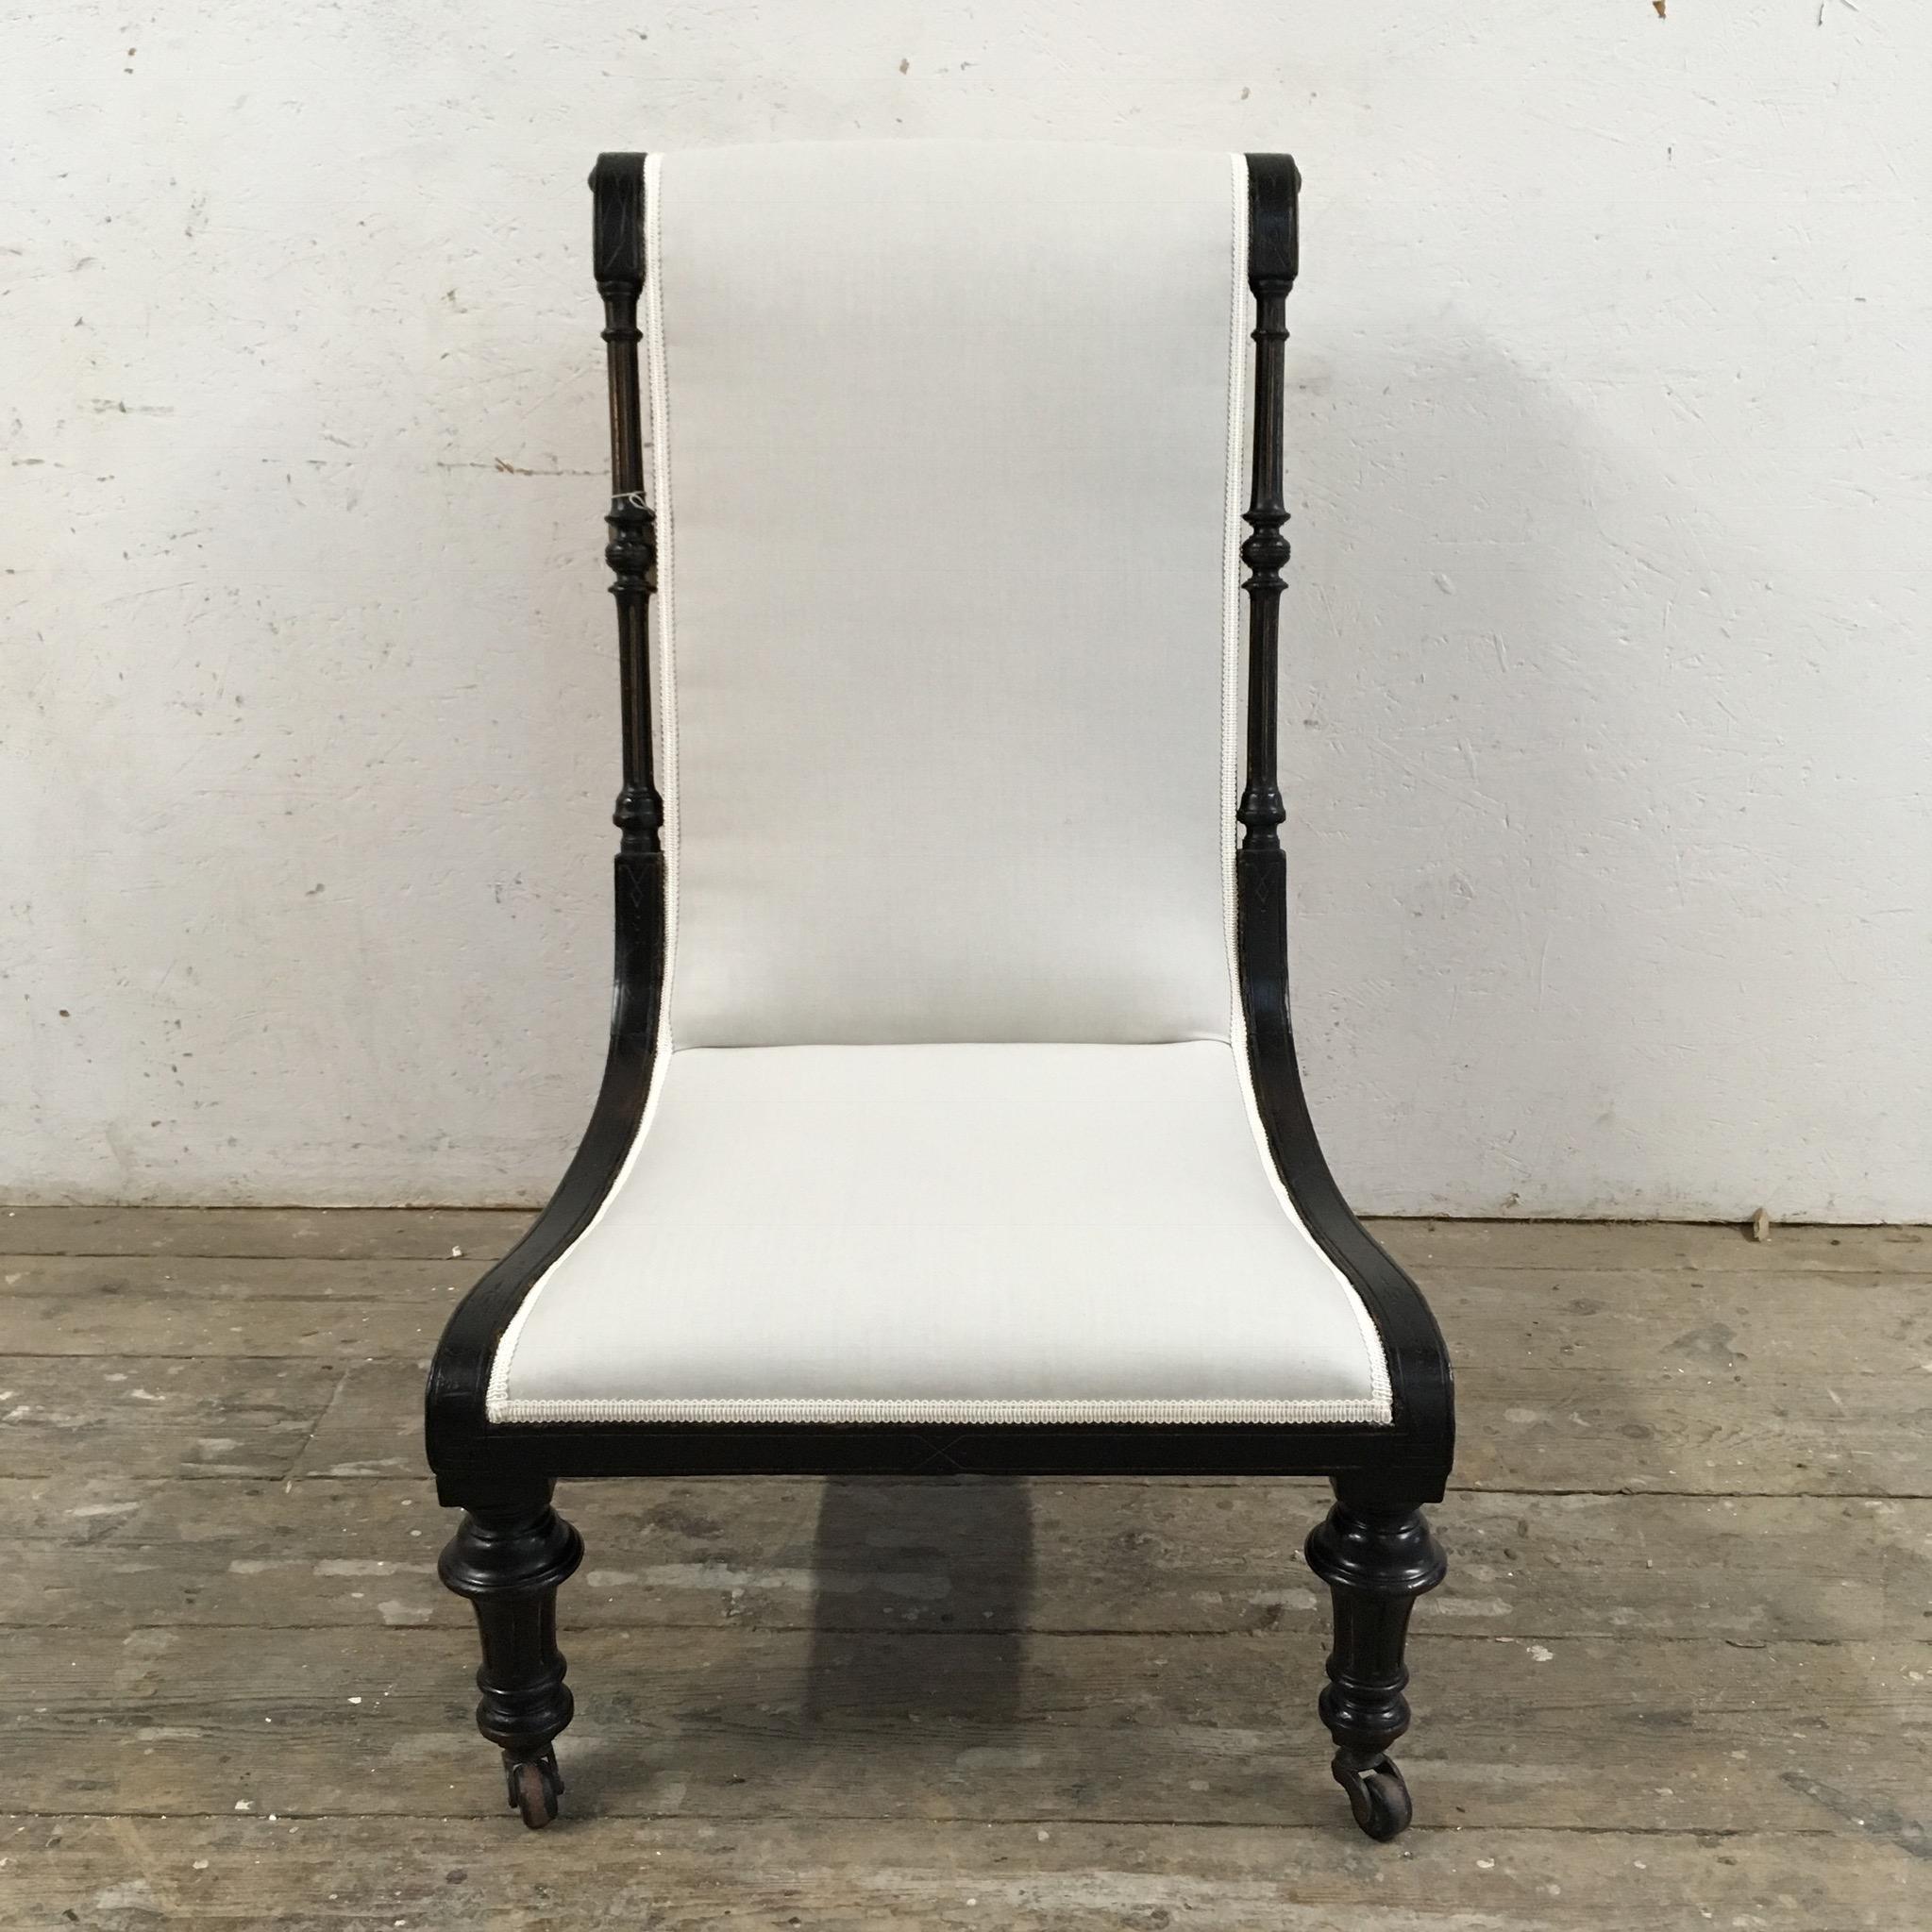 Beautiful Edwardian slipper chair

Ebonised wooden frame

Re-upholstered in a soft light colored herringbone cotton with matching trim 

The chair has hand carved side spindles and turned legs with original castors 

There are also carved